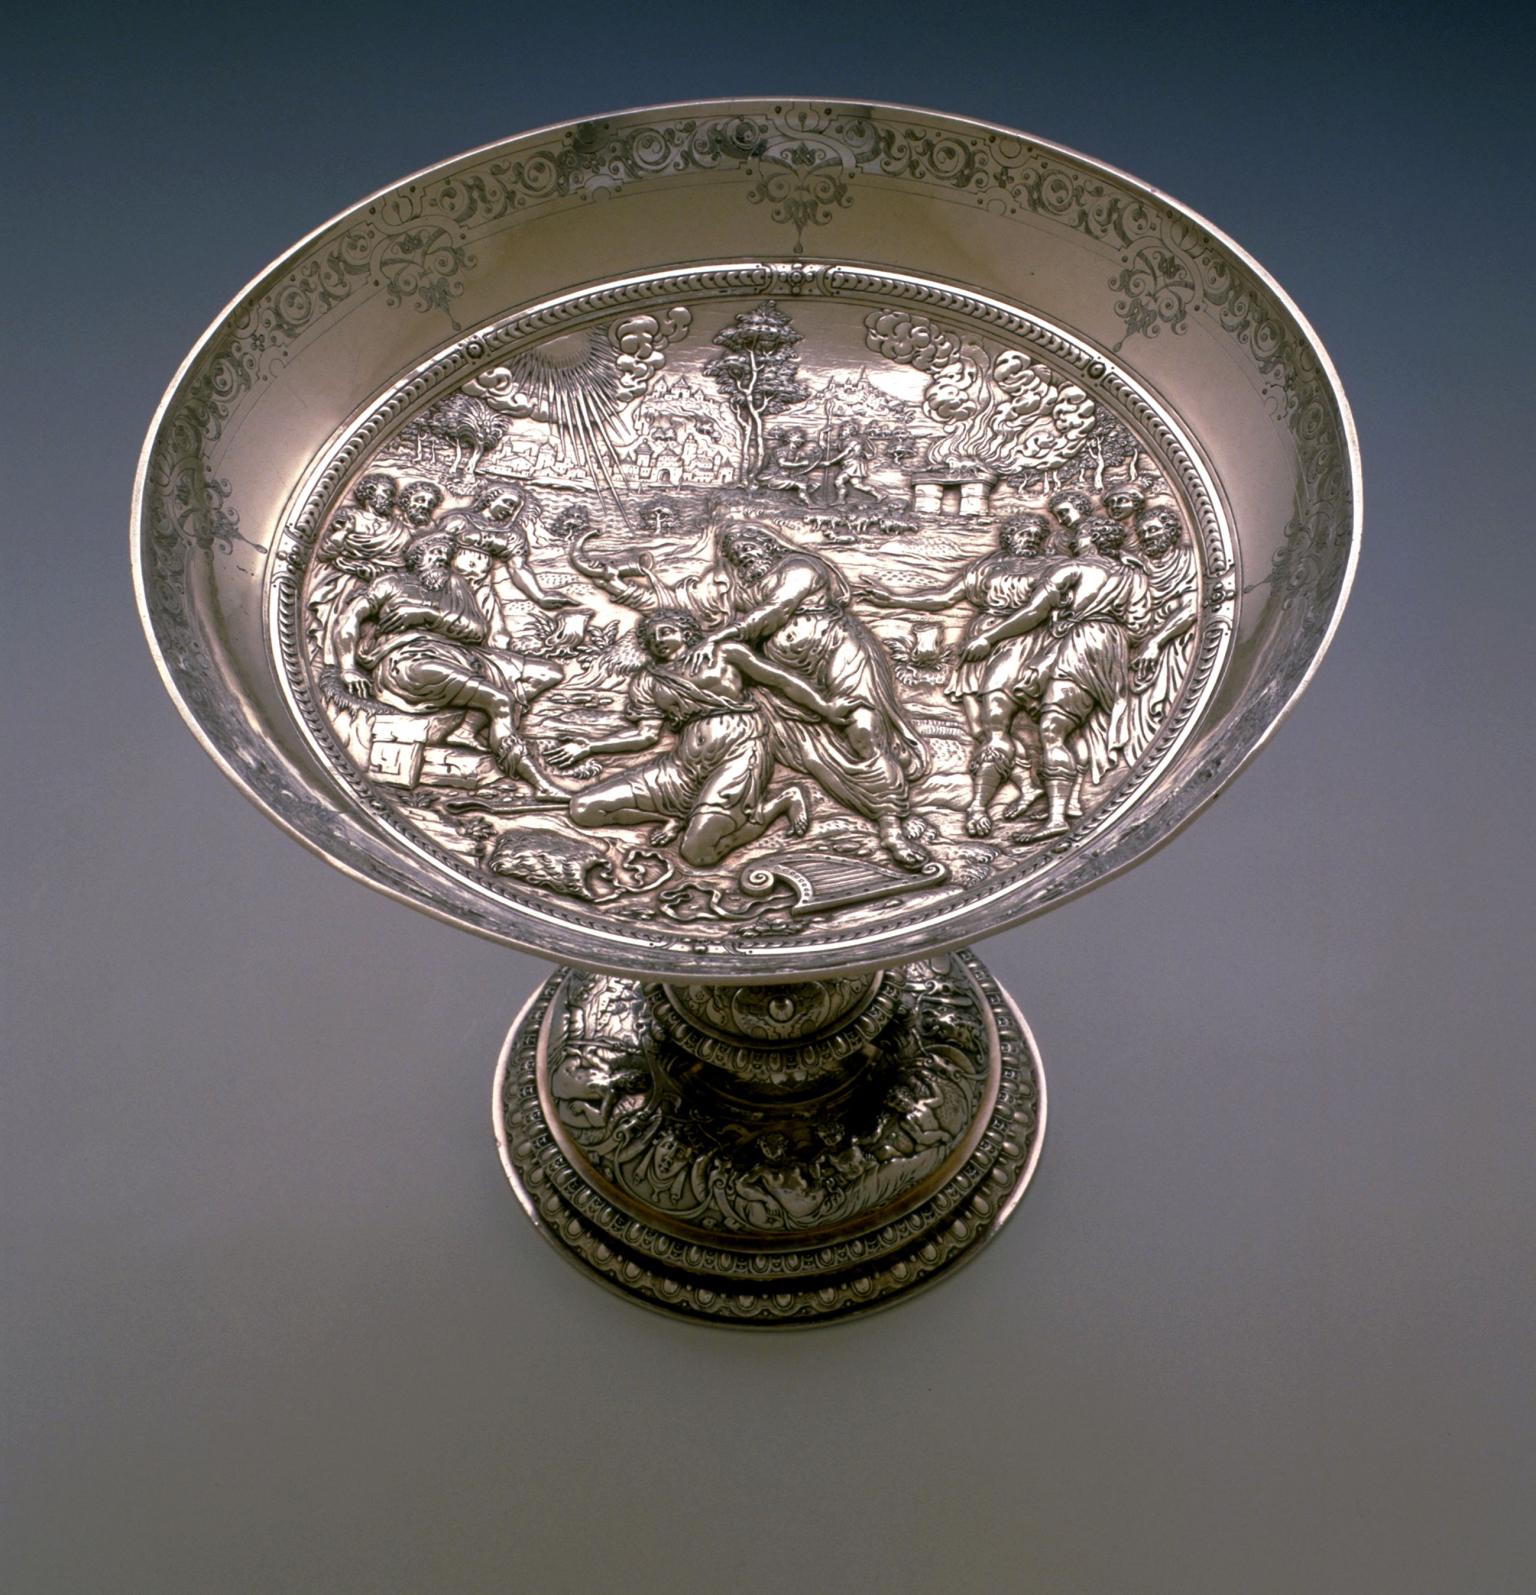 Silver dish decorated on the inside with figures and landscapes.